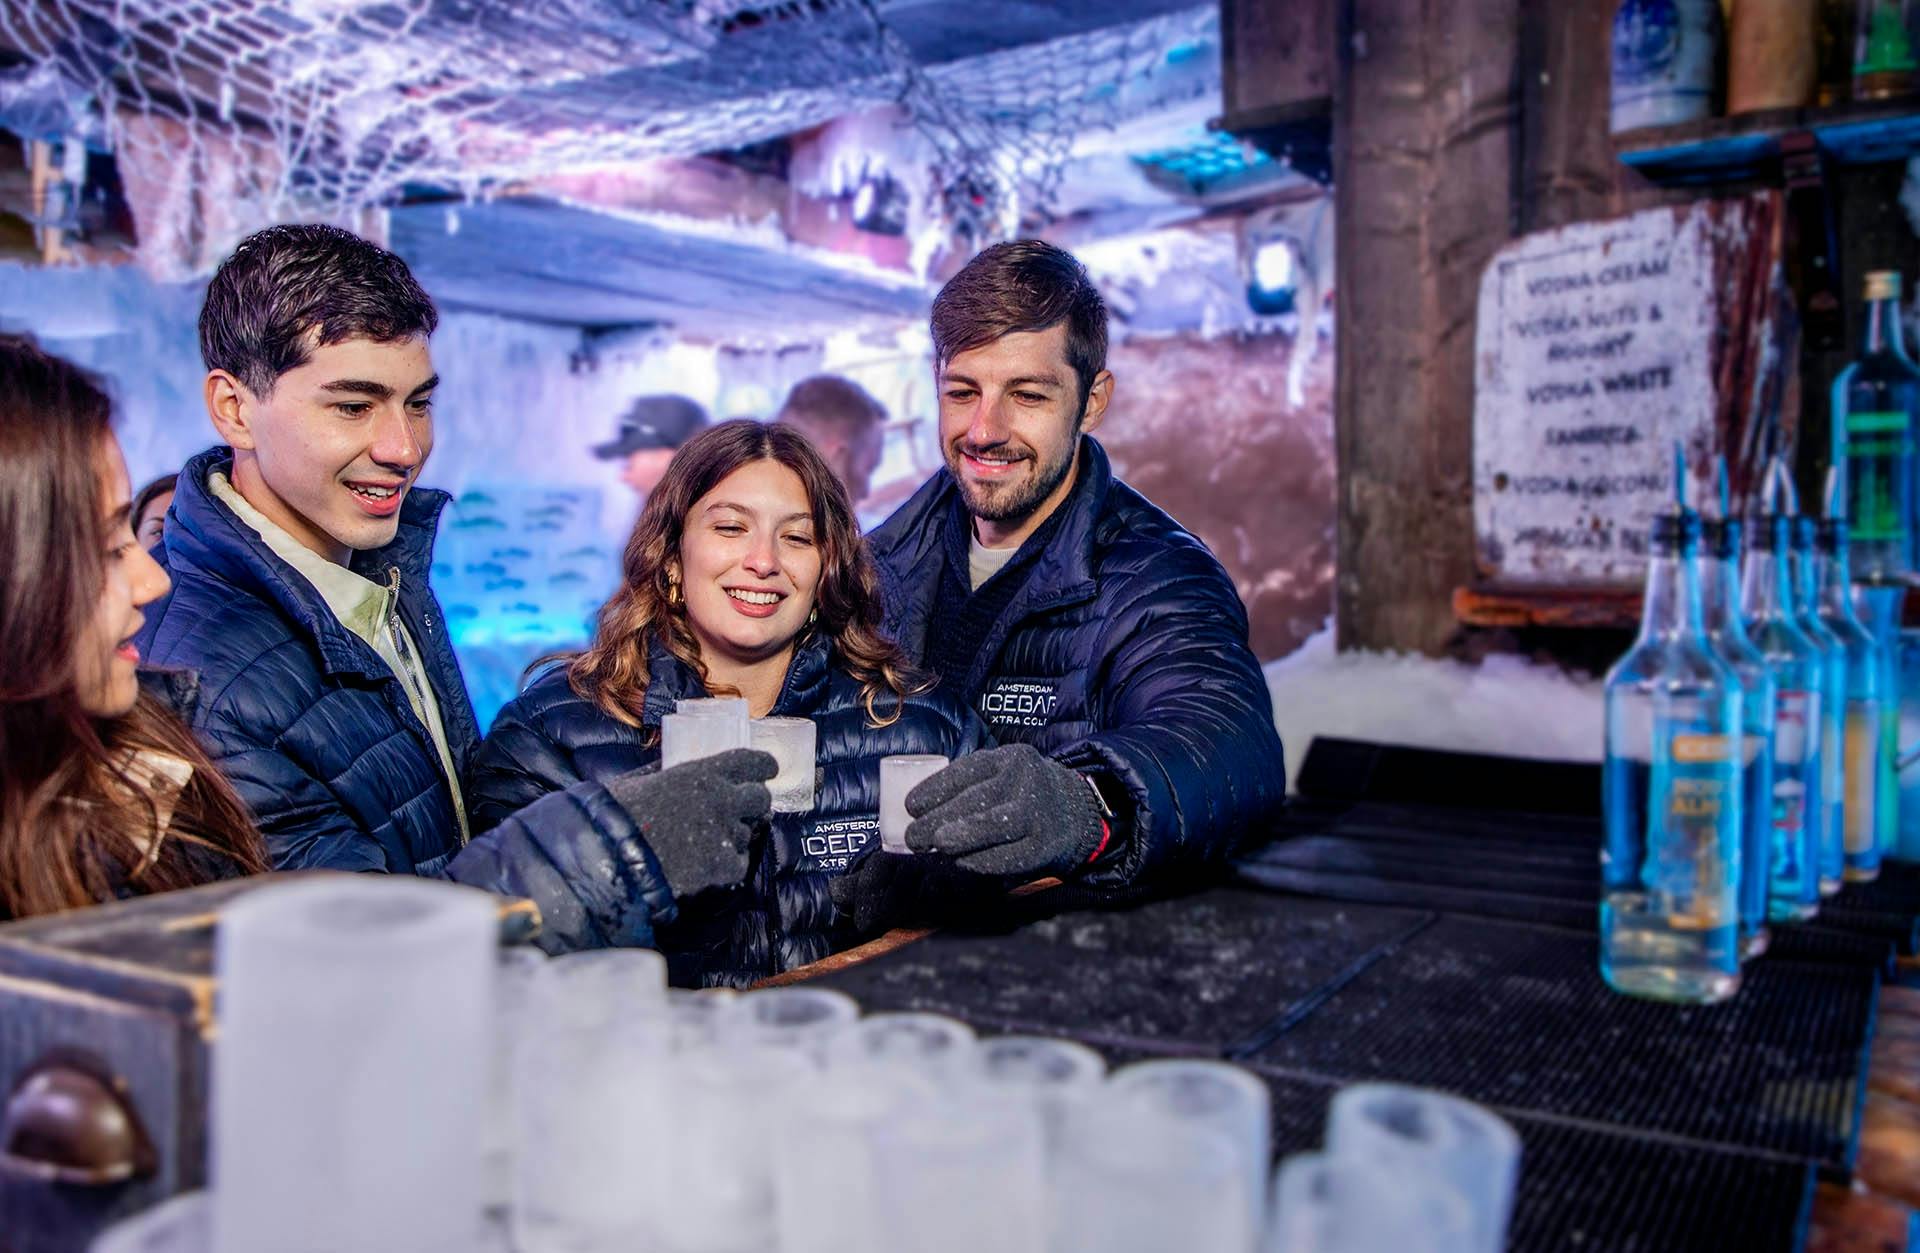 Billets prioritaires pour le XtraCold Amsterdam Icebar